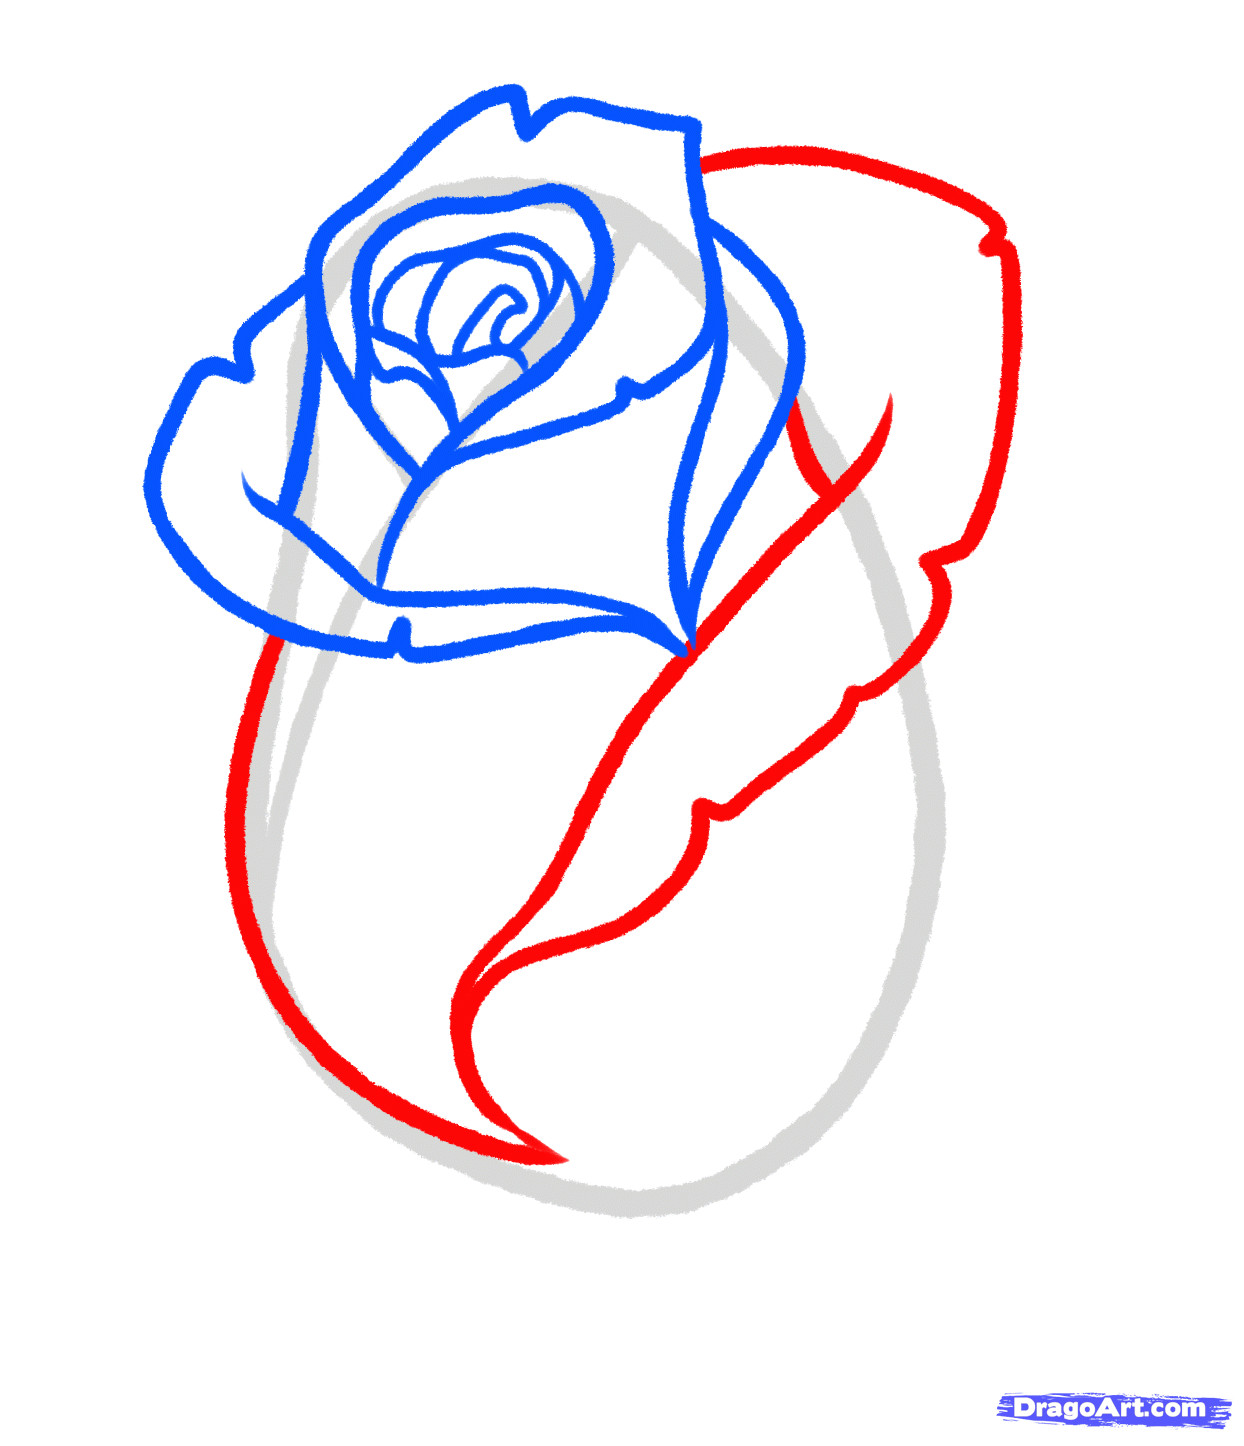 Drawing A Rose Gif How to Draw A Rose Bud Rose Bud Step 5 Sketching Flowers